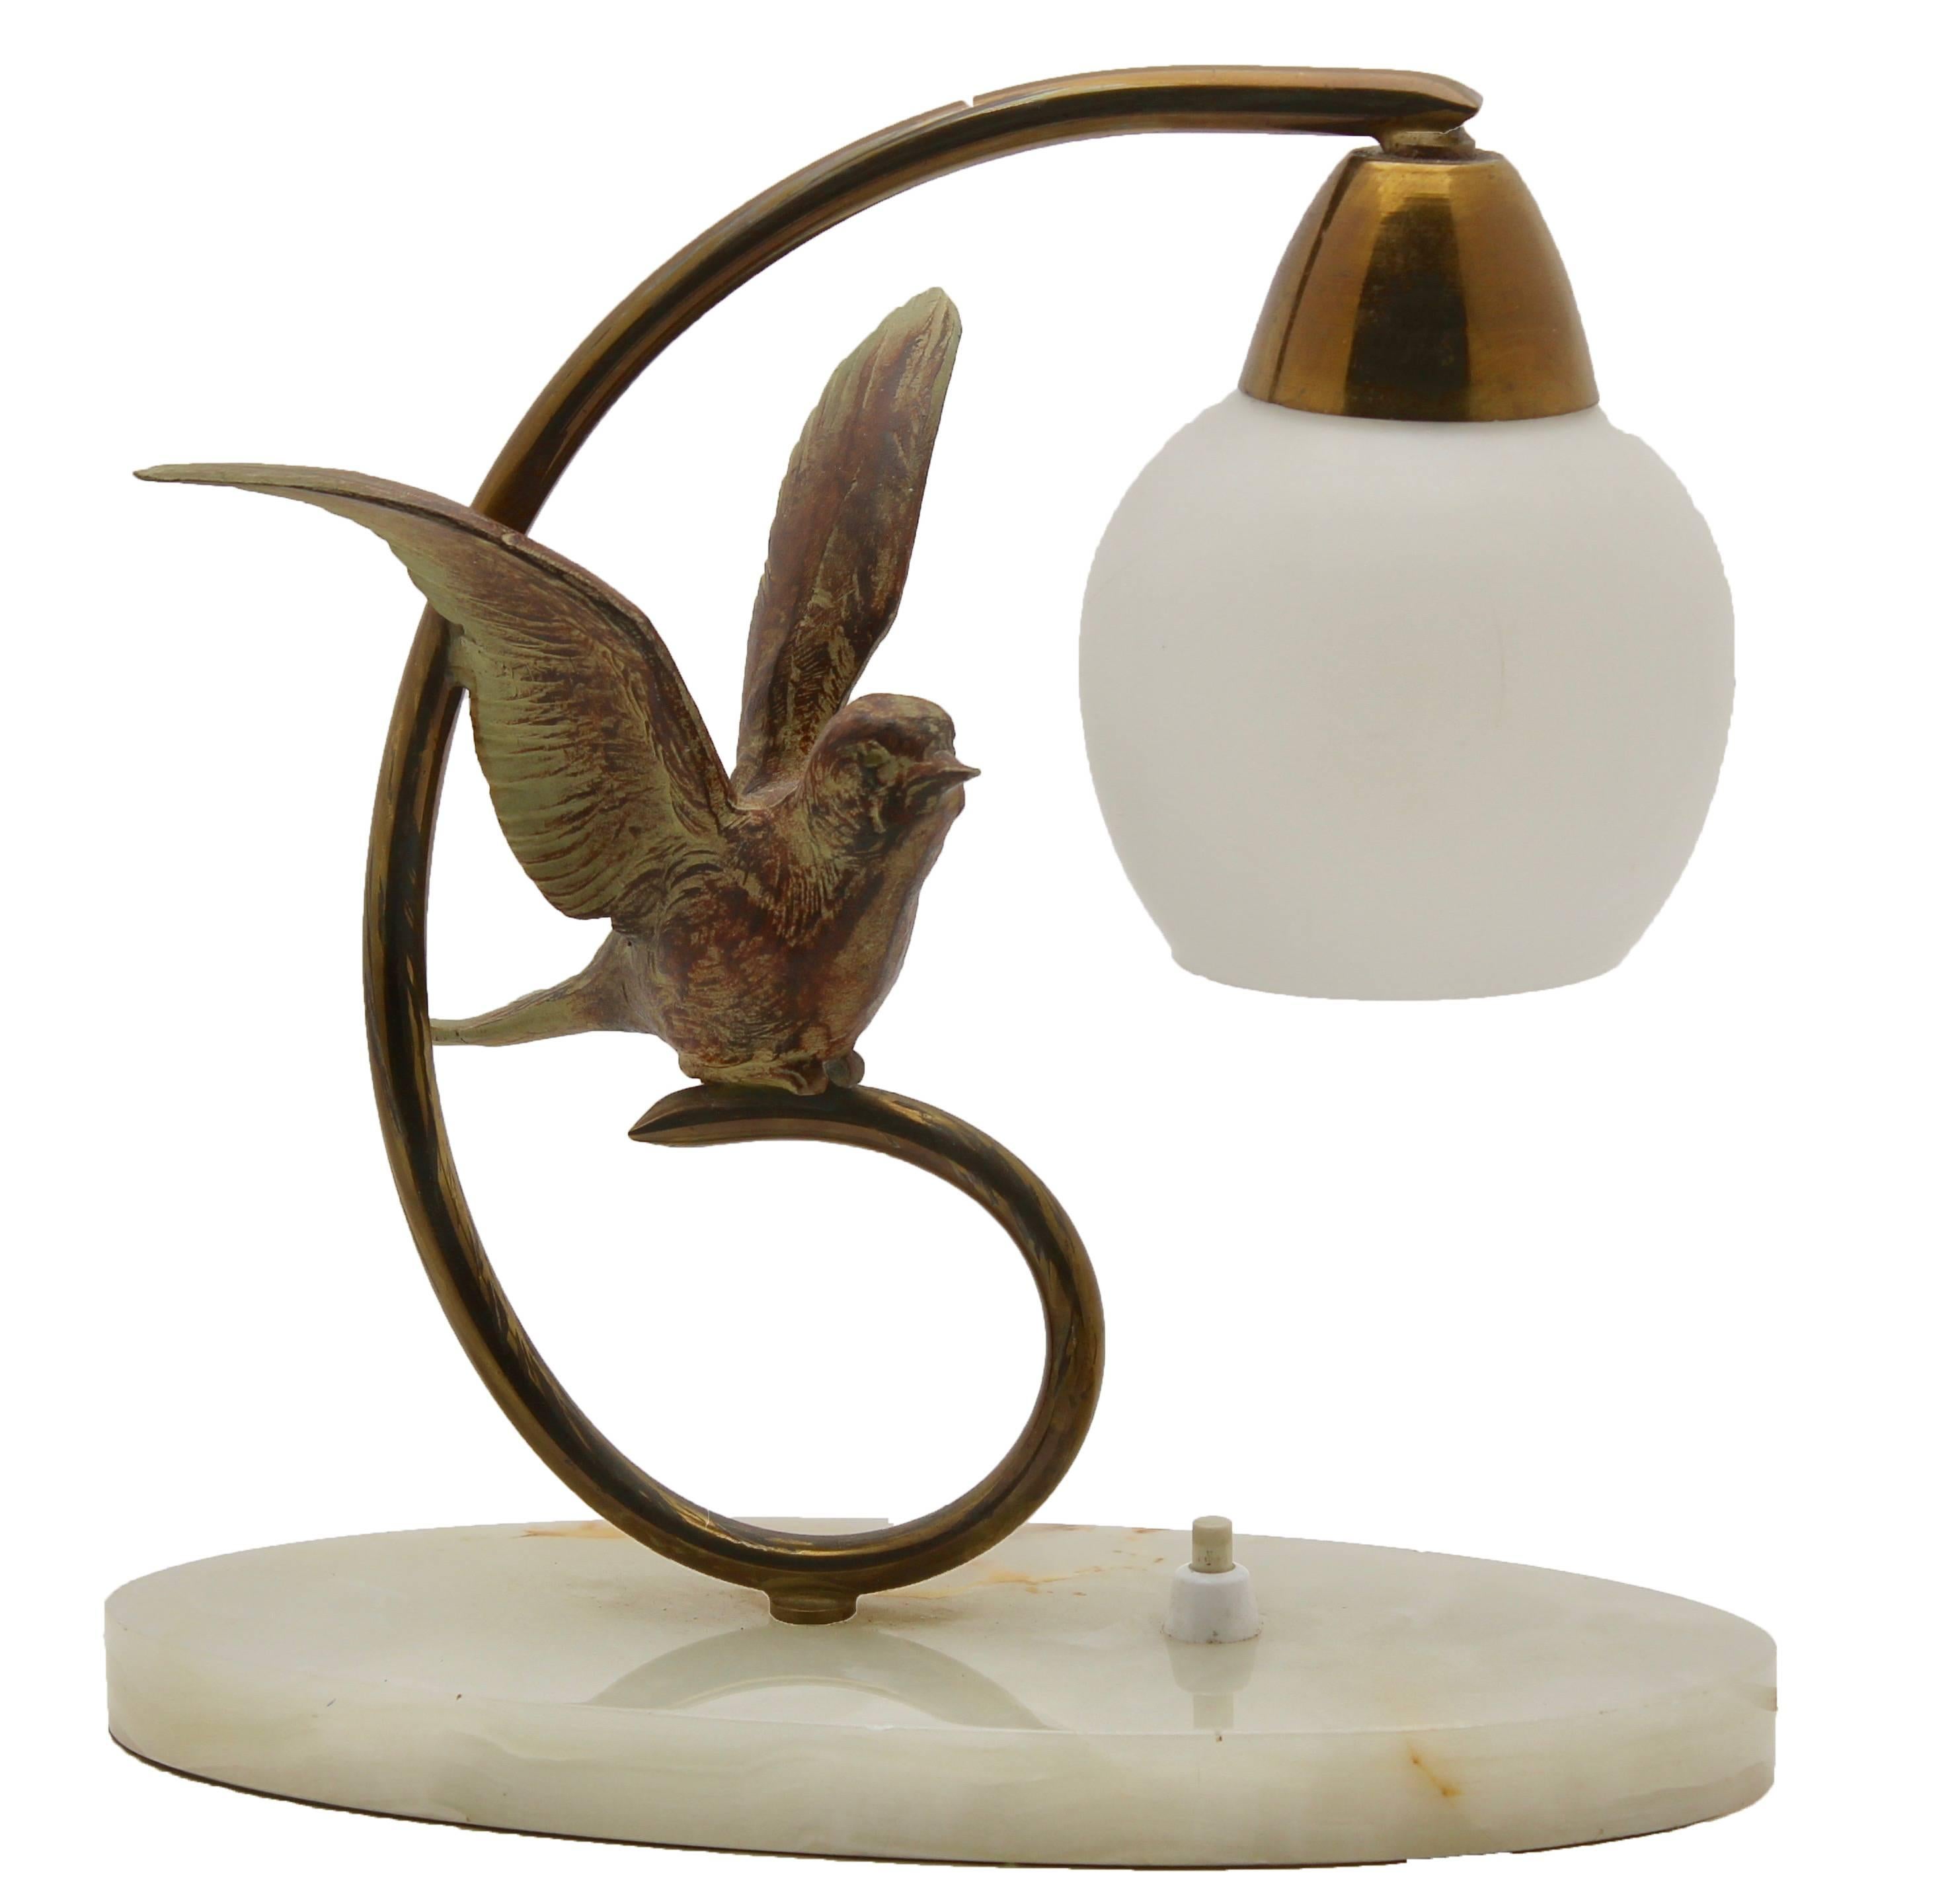 Hand-Crafted Art Deco Table Lamp with Bird Made of Bronze on Base of Alabaster, Label Prolux